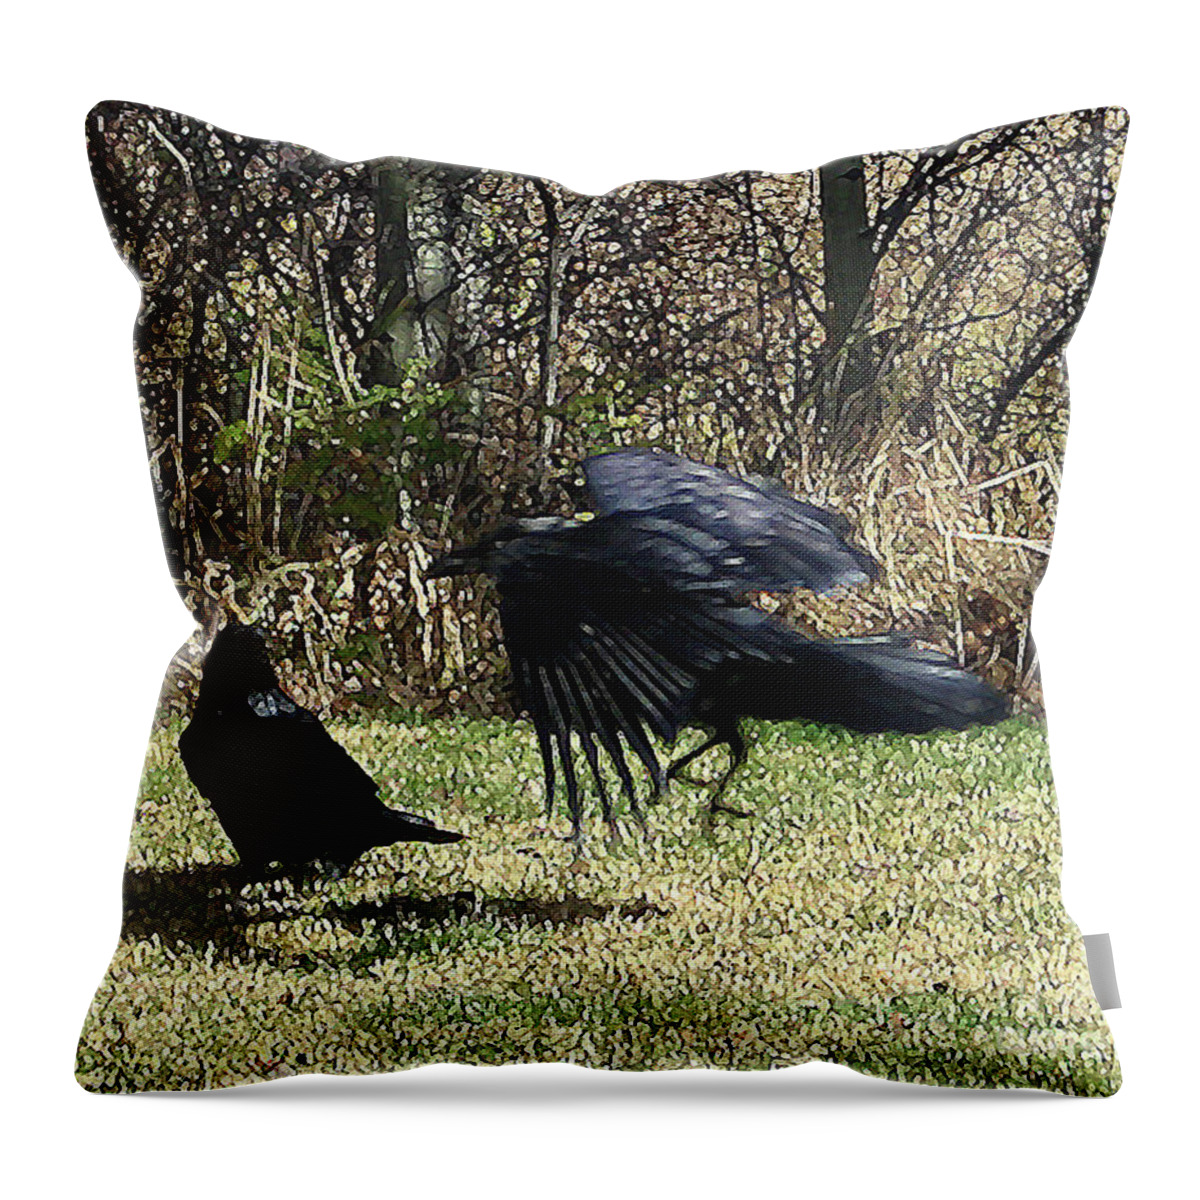 #raven Throw Pillow featuring the digital art Ravens Calling by Jacquelinemari